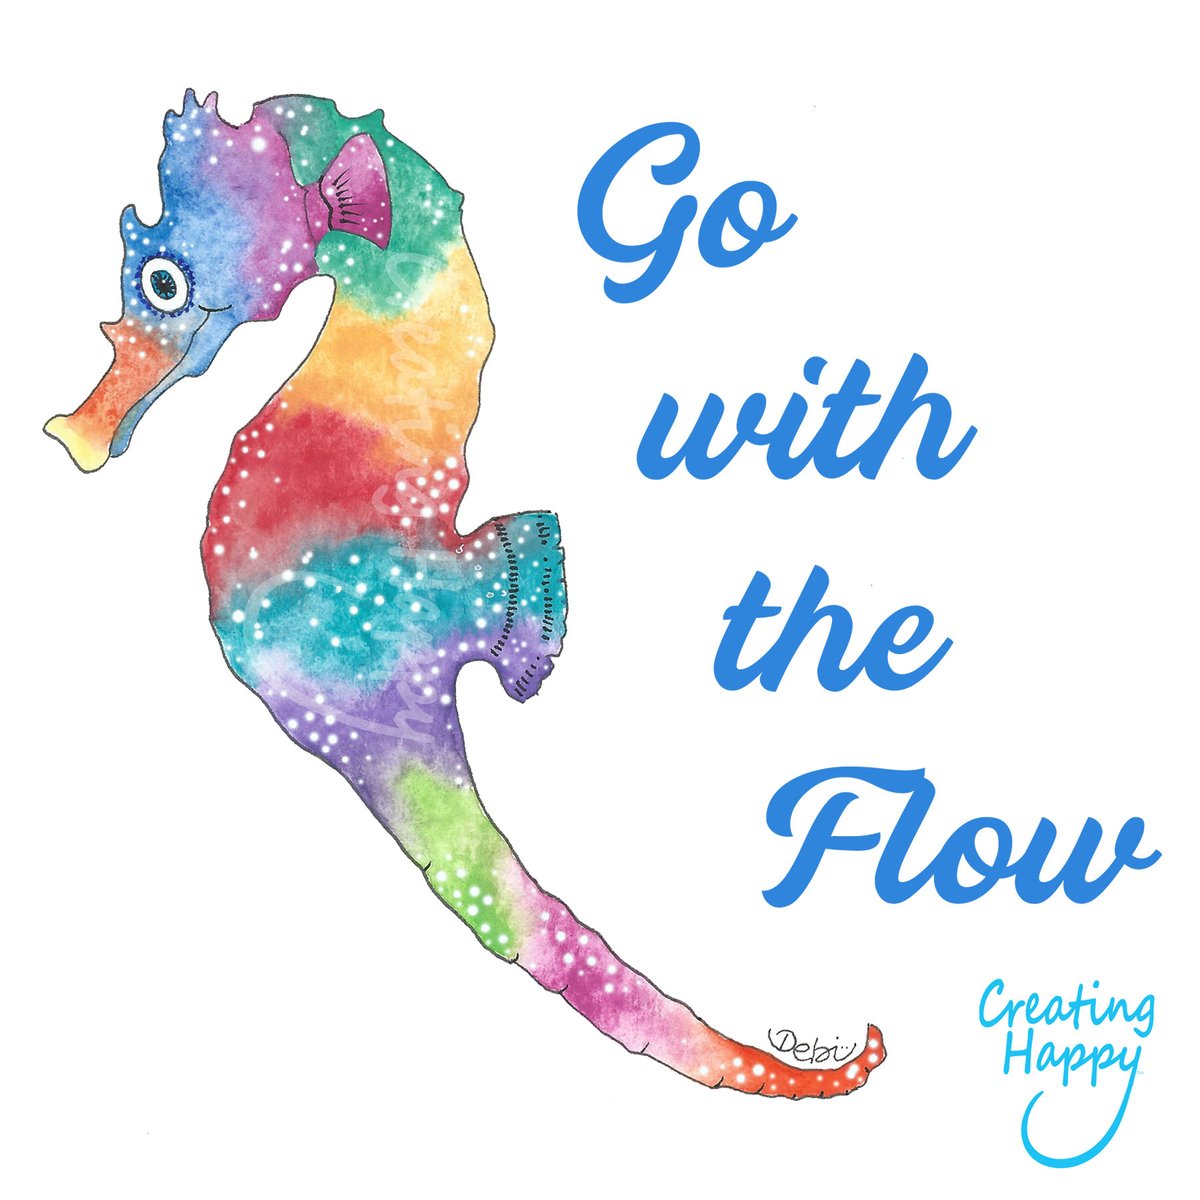 Keep the Faith and Go with the Flow. Everything's gonna be alright.

#watercolor #seahorse #faith #flow #creatinghappy